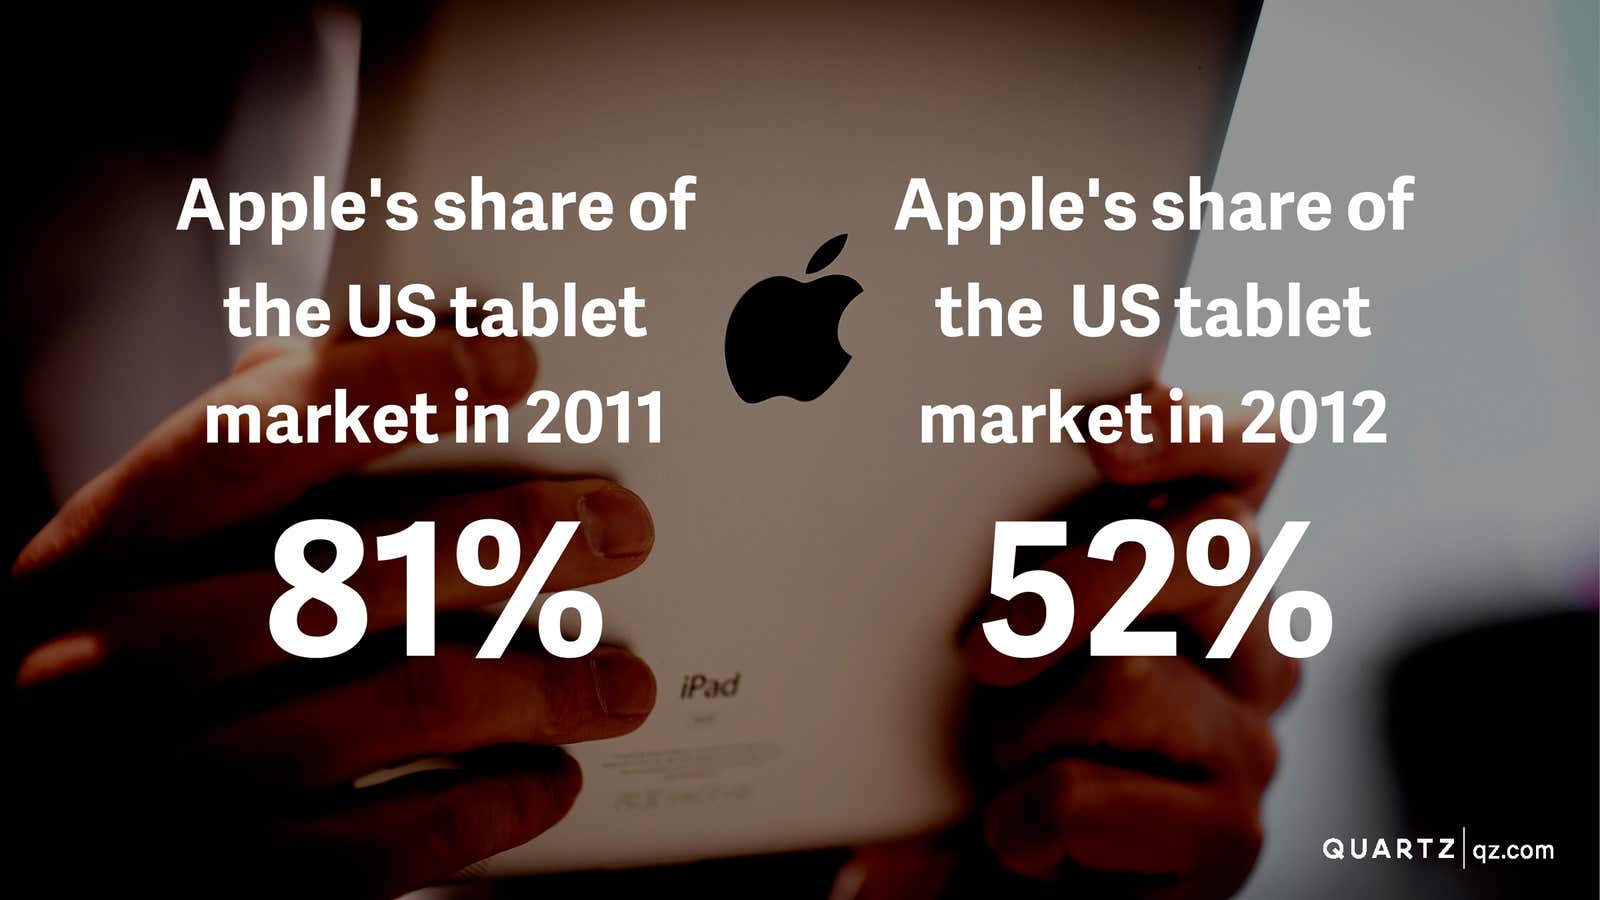 Apple’s market share has declined significantly in just the past year